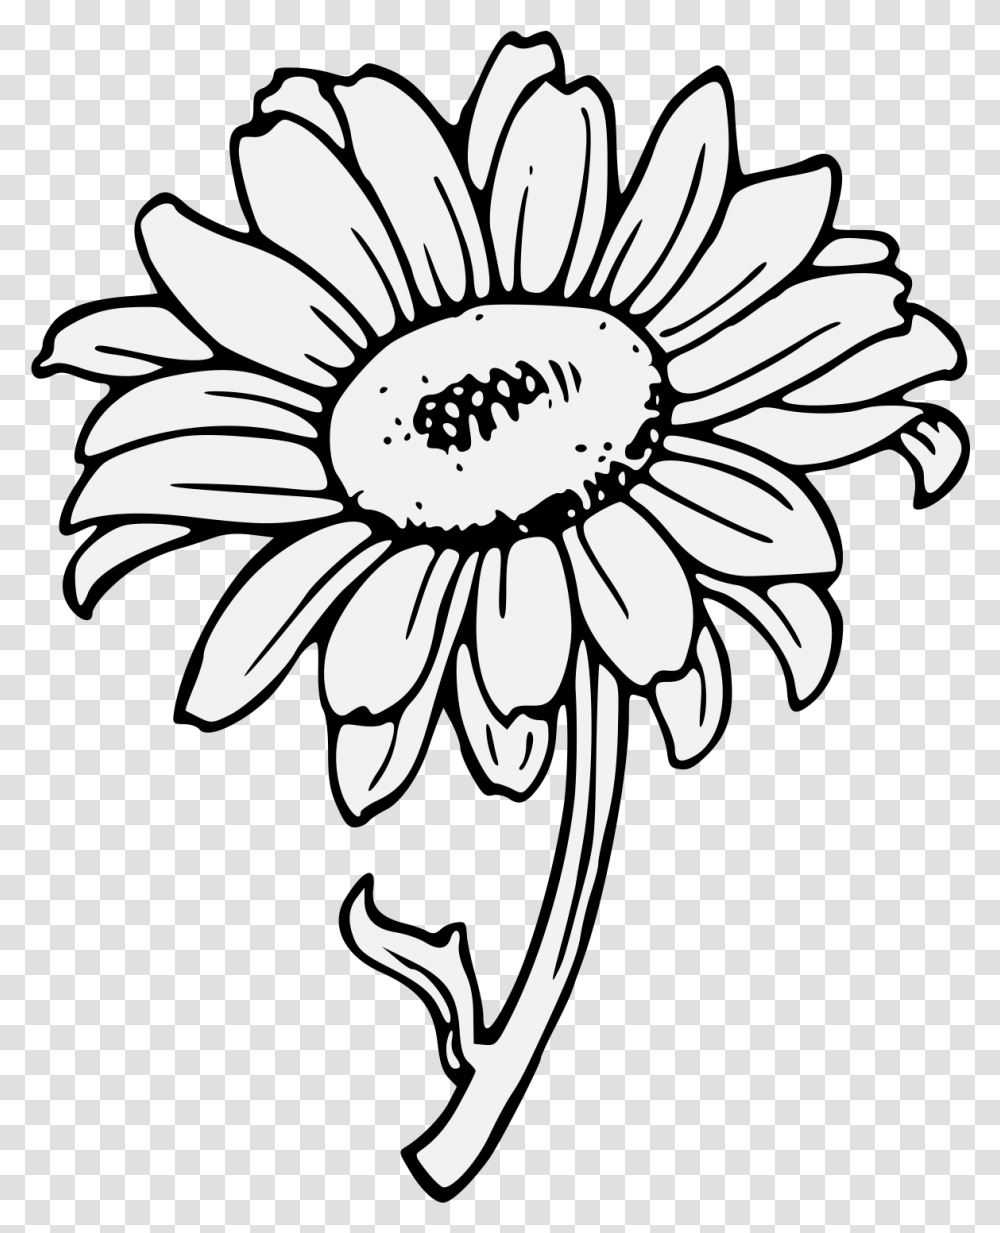 Sunflower Clipart Background Download Clip Art Of Yellow Sunflower, Plant, Blossom, Daisy, Daisies Transparent Png